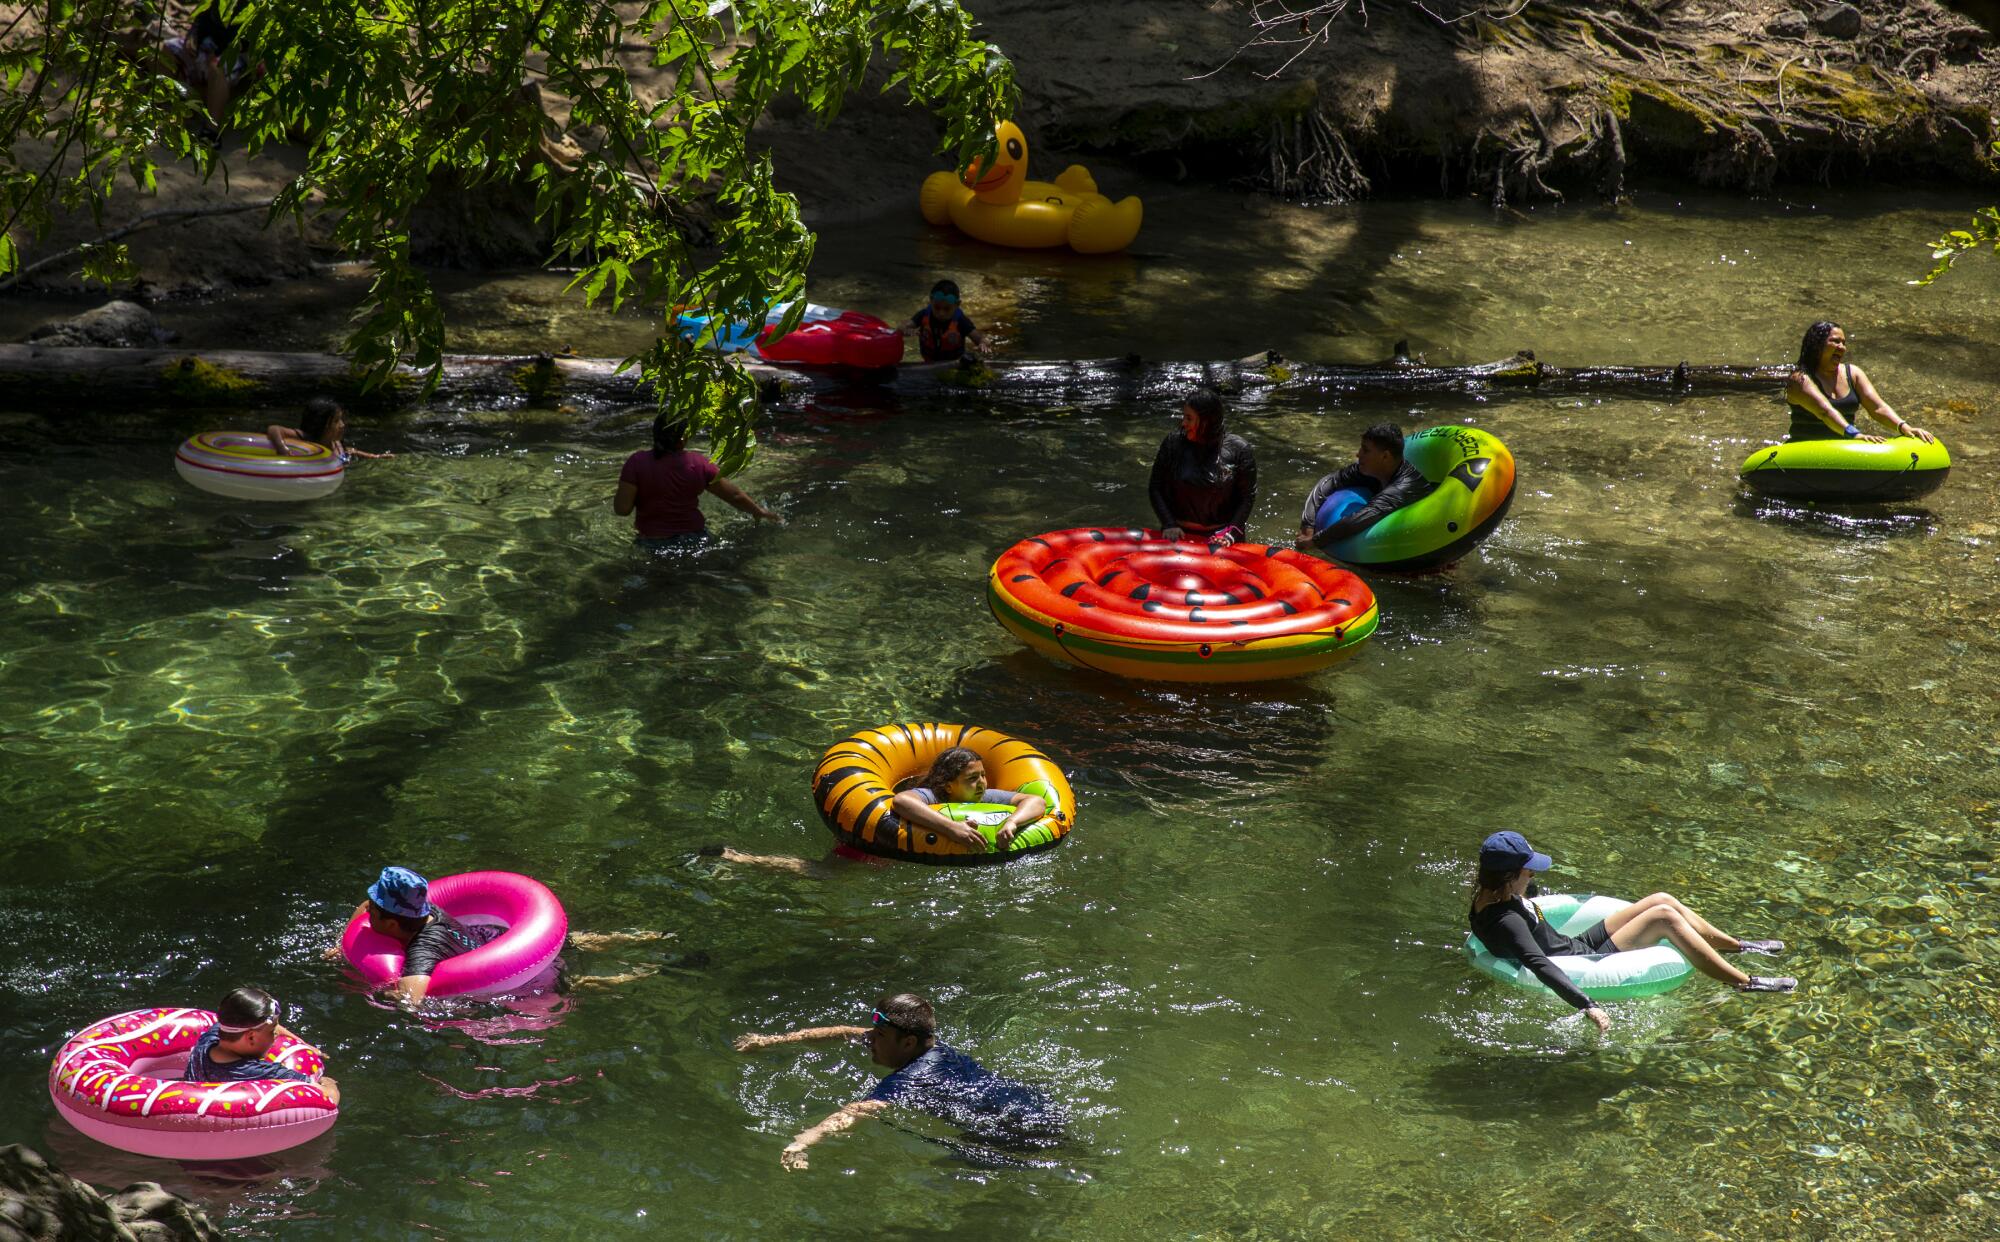 People relax in inner tubes in calm water with overhanging trees.